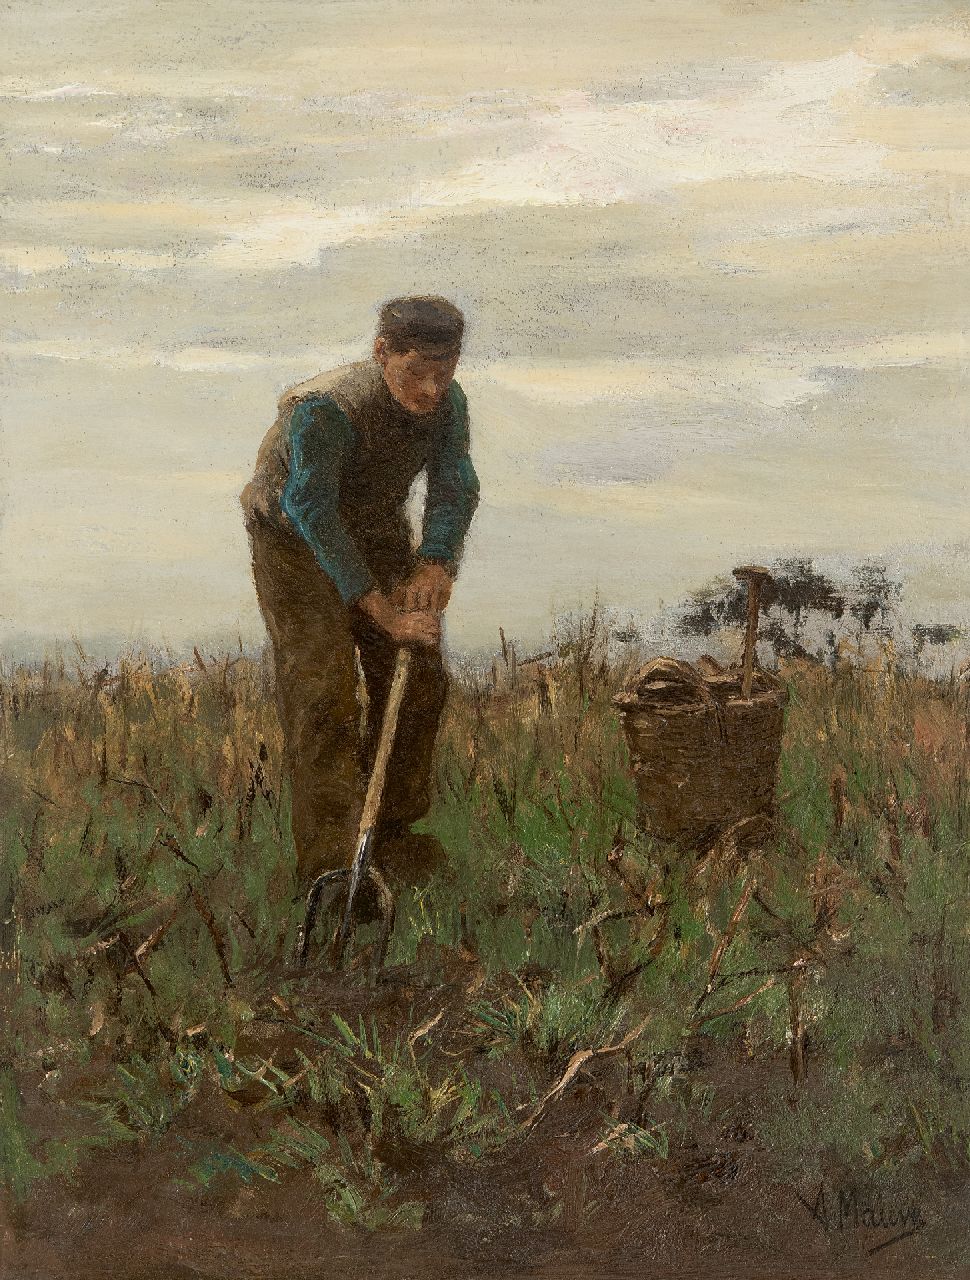 Mauve A.  | Anthonij 'Anton' Mauve | Paintings offered for sale | Digging potatoes, oil on panel 32.0 x 24.4 cm, signed l.r.